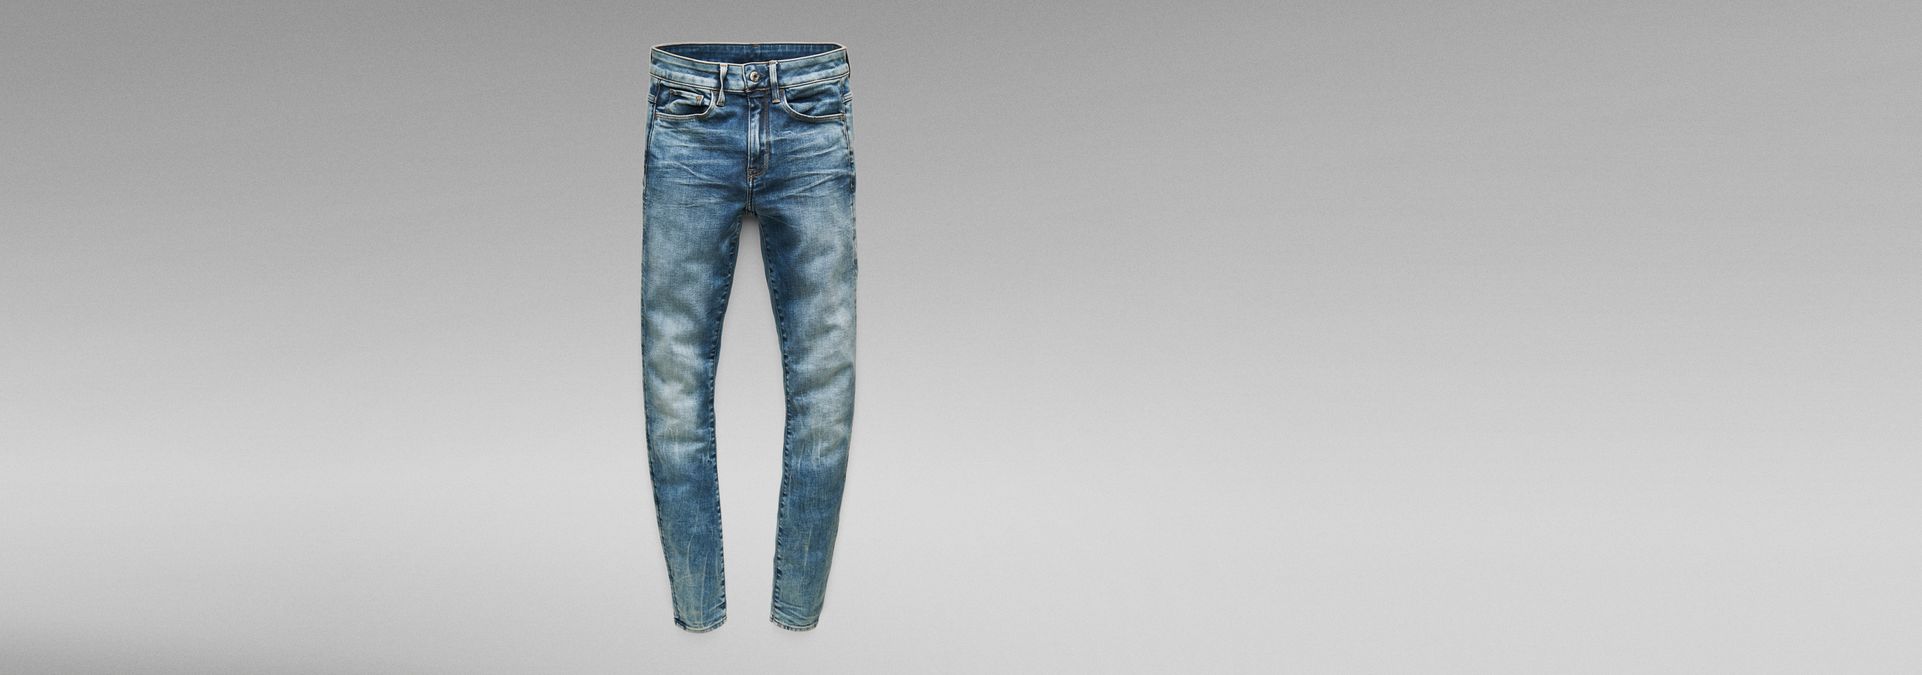 3301 Deconstructed High Waist Skinny Jeans | G-Star RAW®